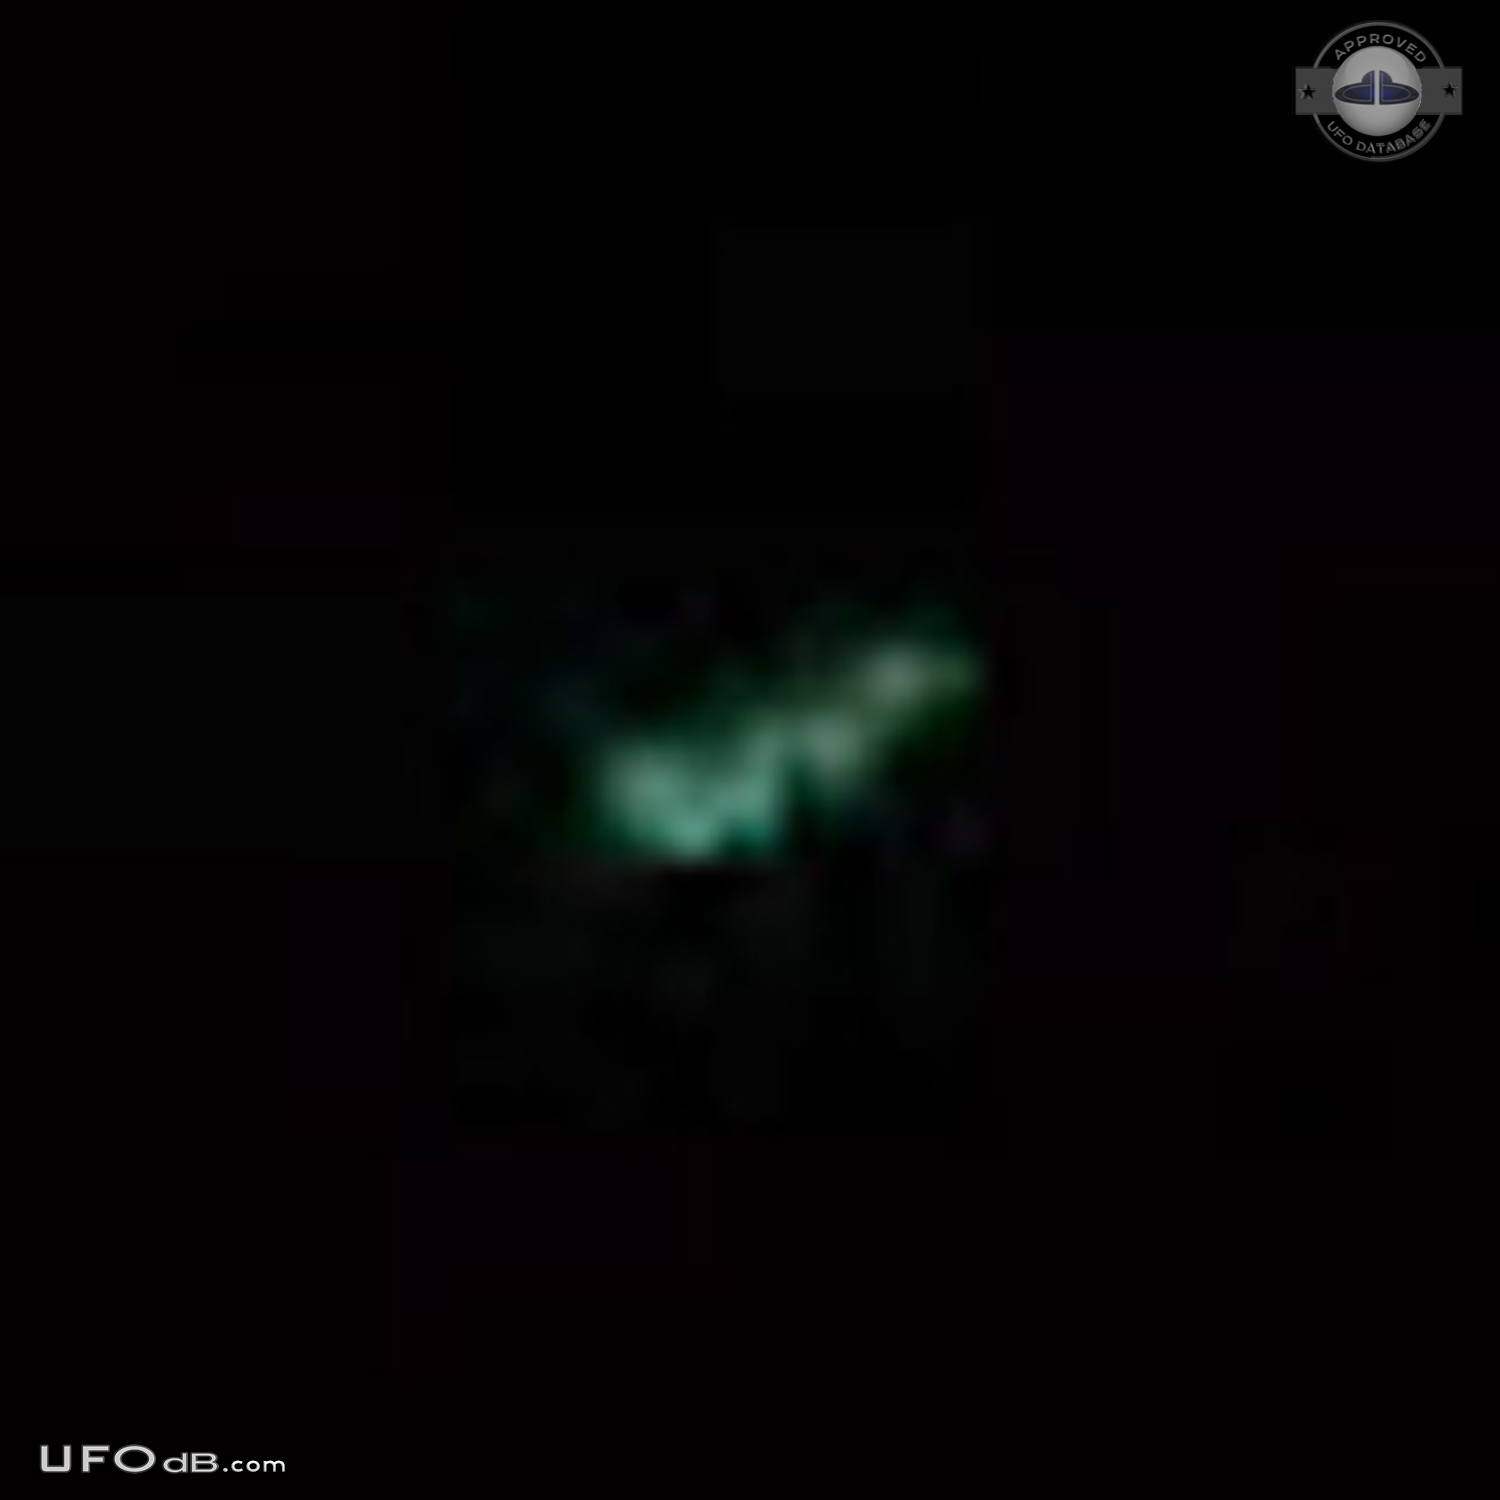 Incredible UFO sighting with pictures & details - Troyan Bulgaria 2010 UFO Picture #464-6